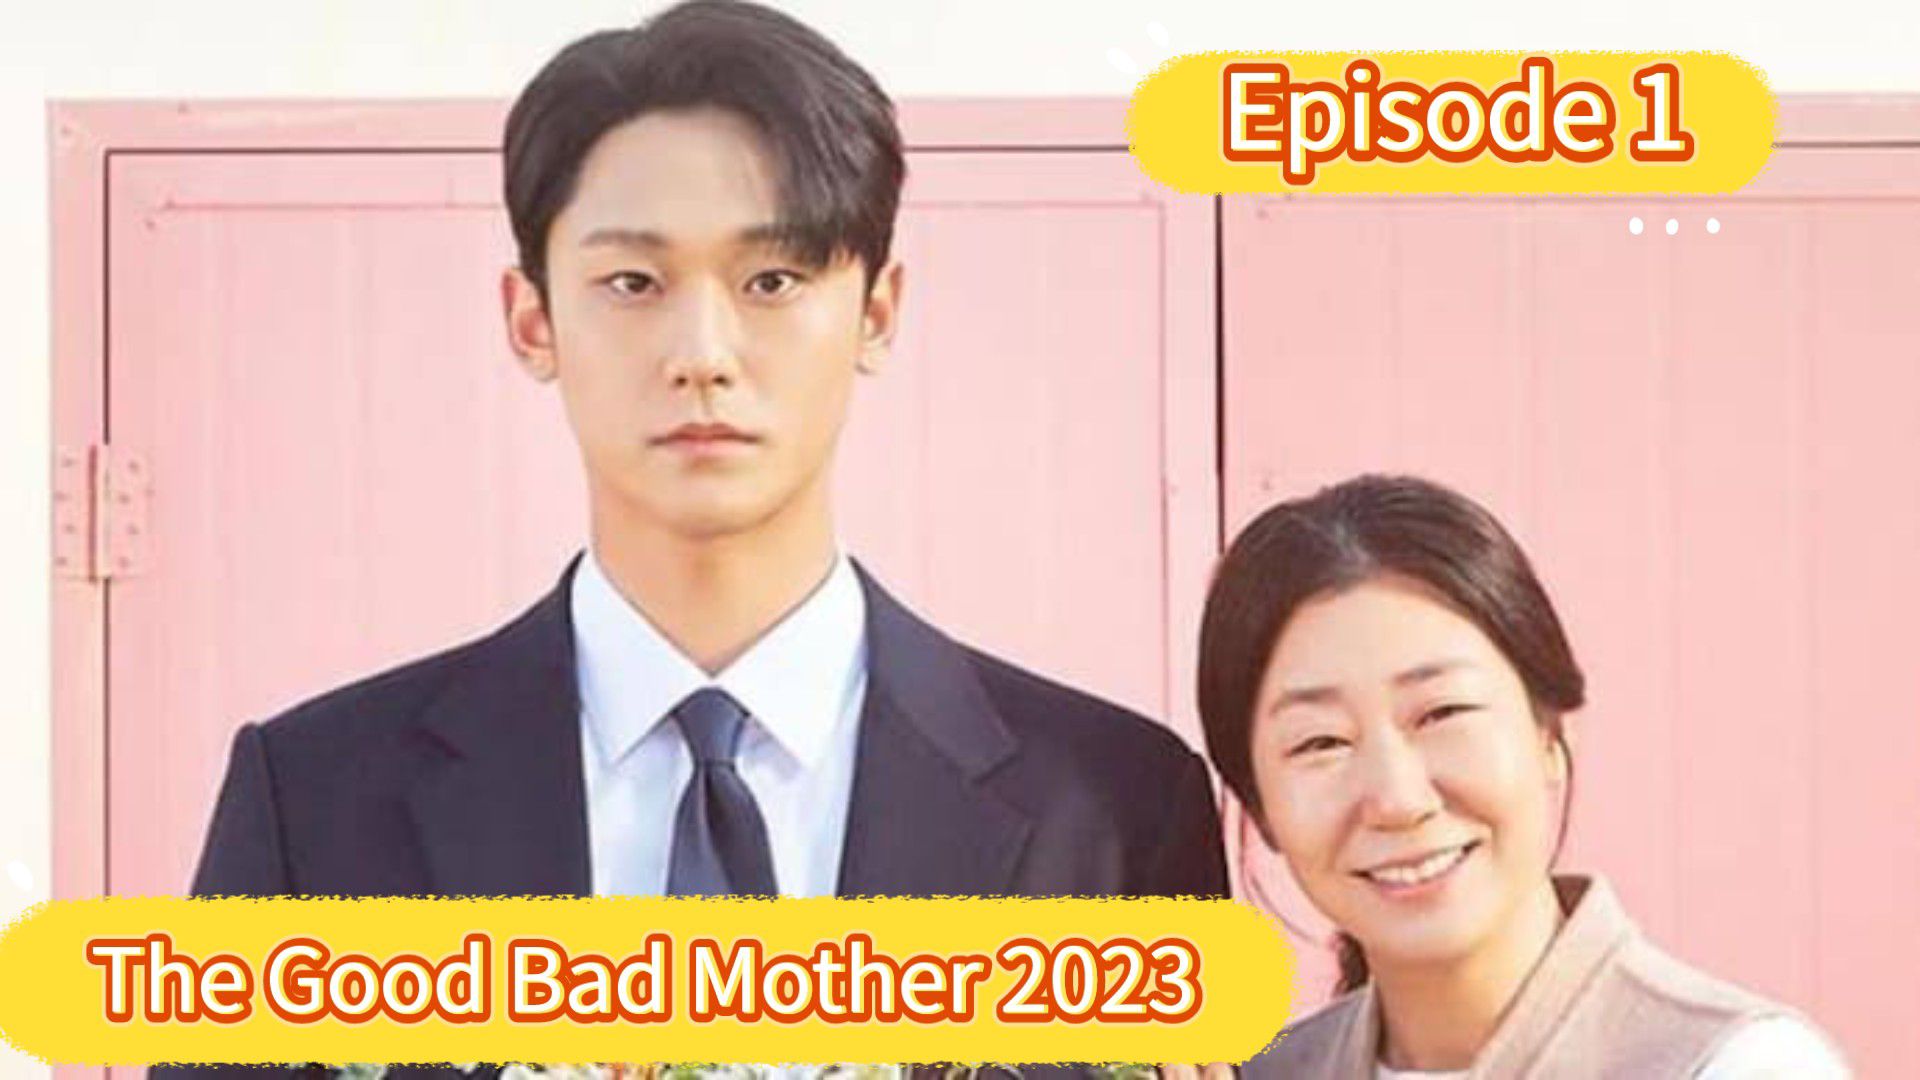 The Good Bad Mother: Episodio 1